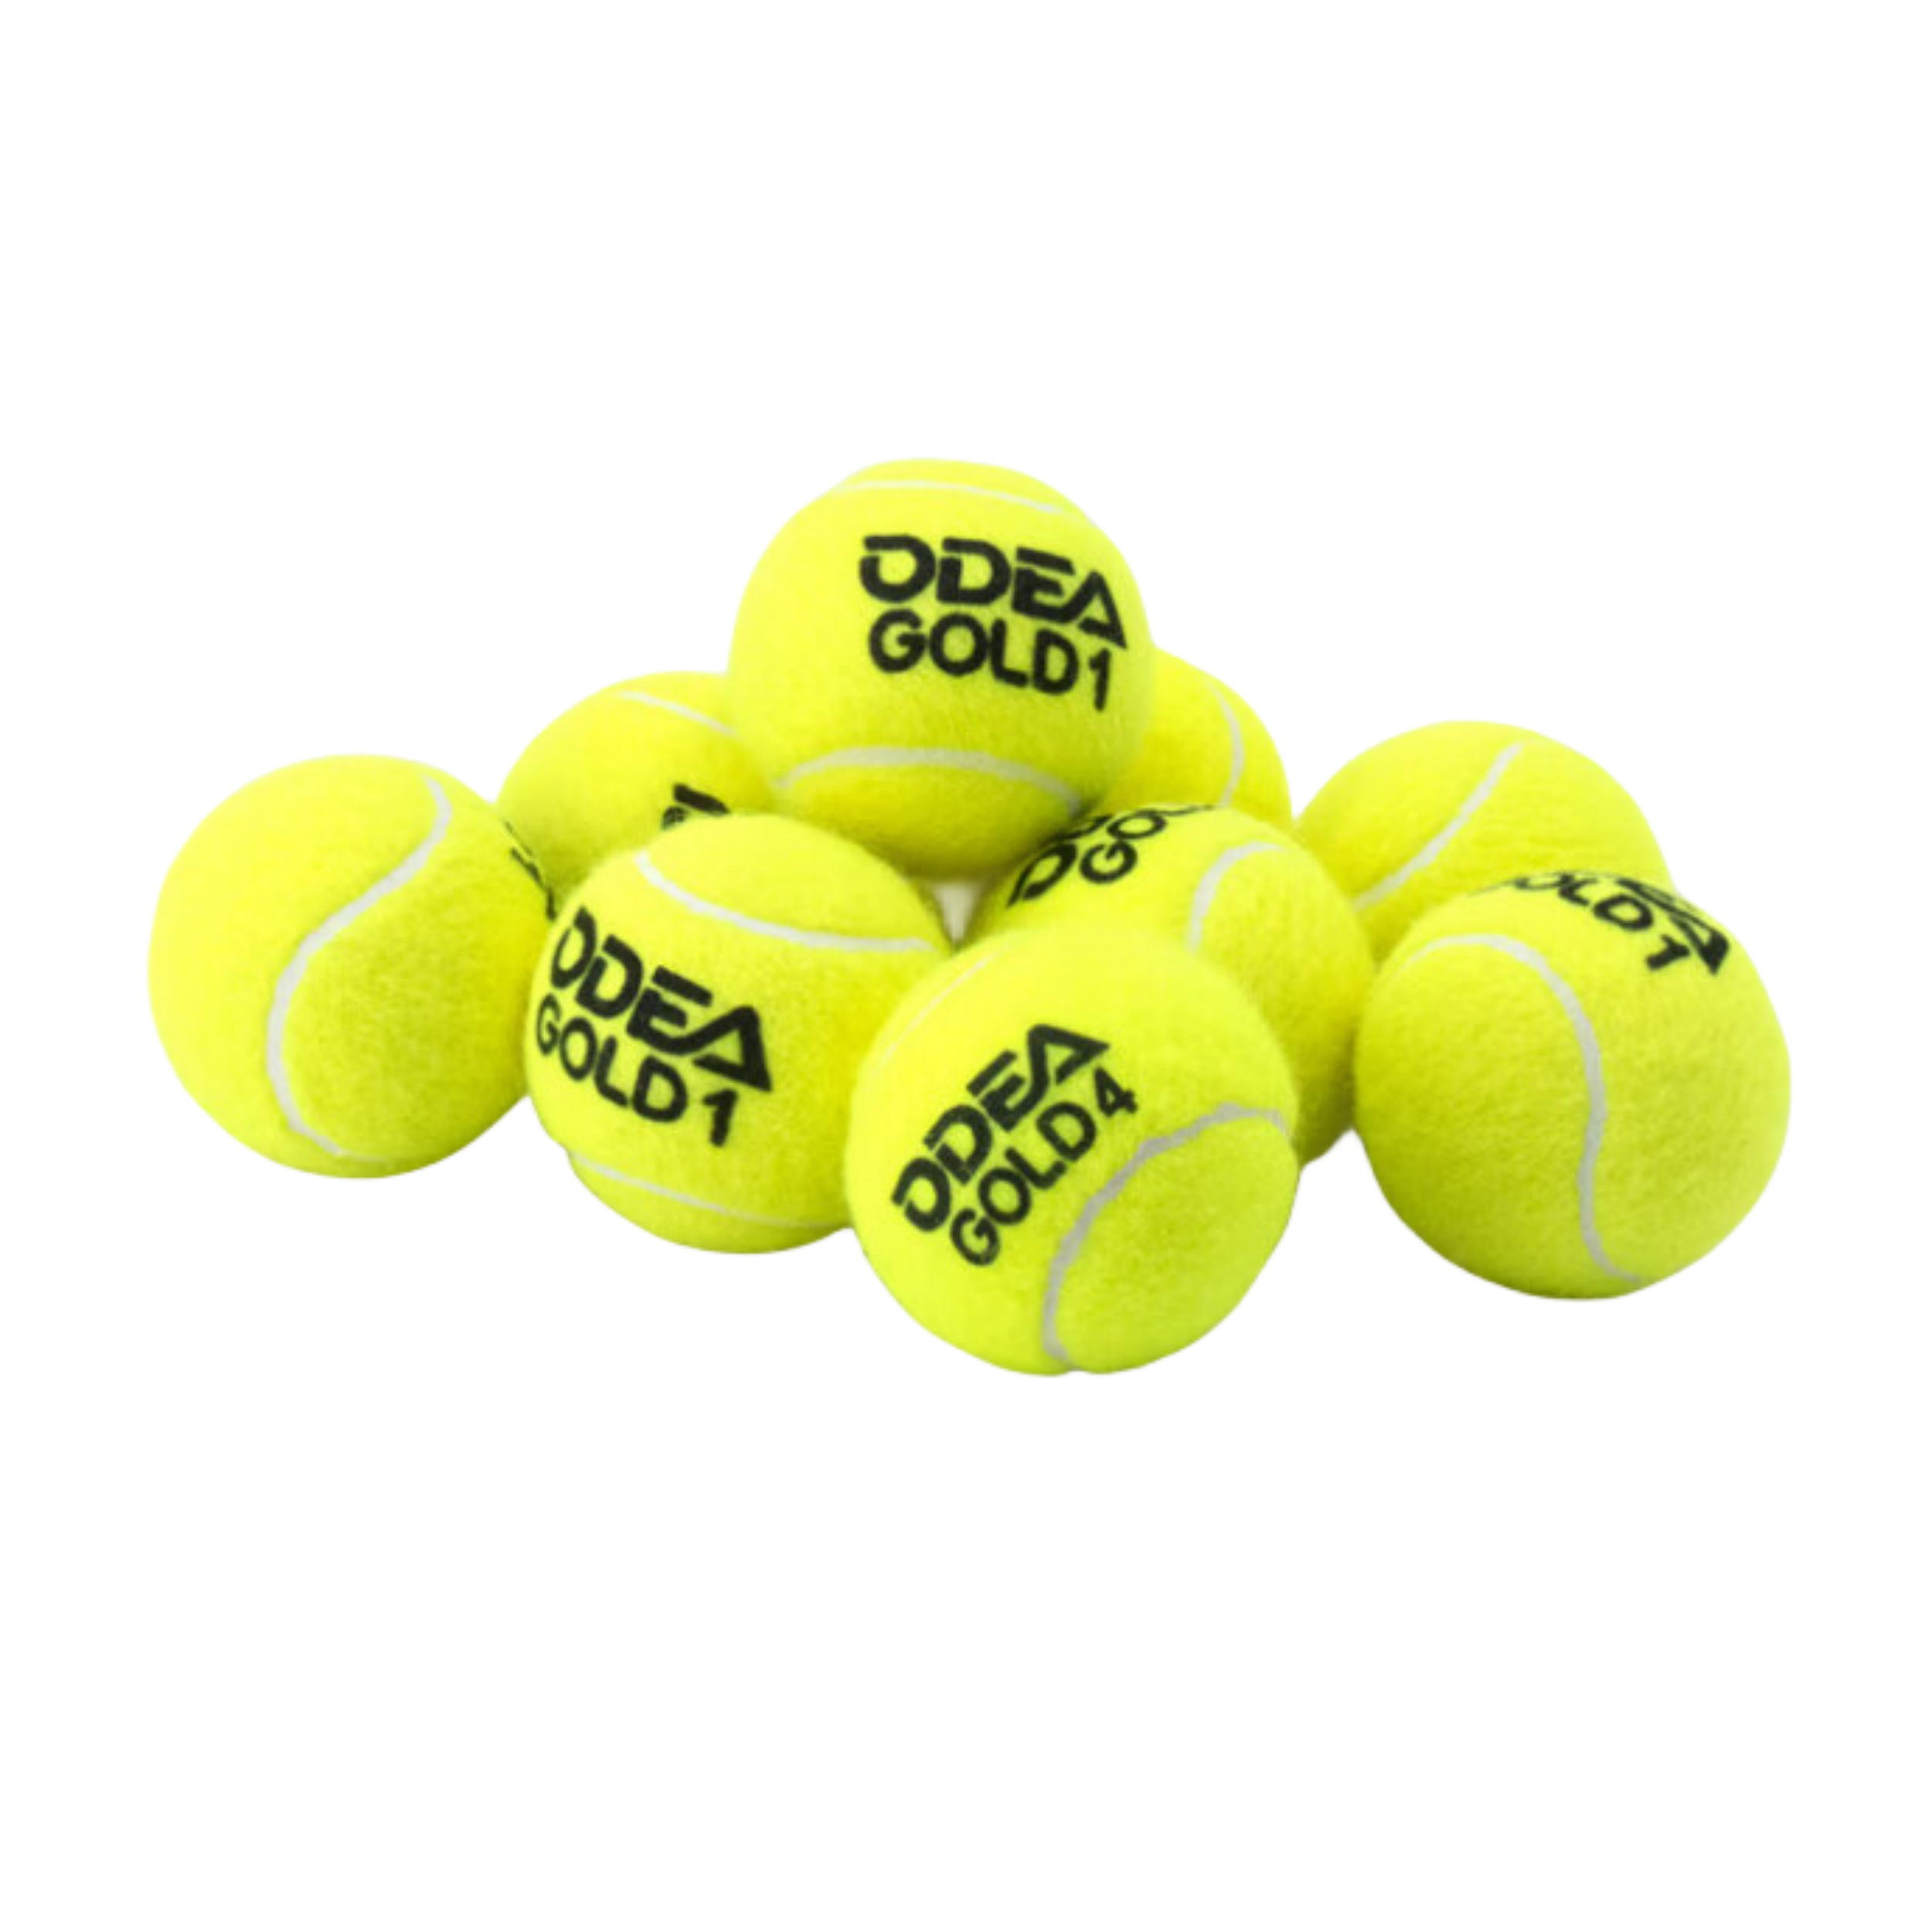 Odea Gold Professional Training Tennis Balls - 60 Pack, ITF Approved, All Surface